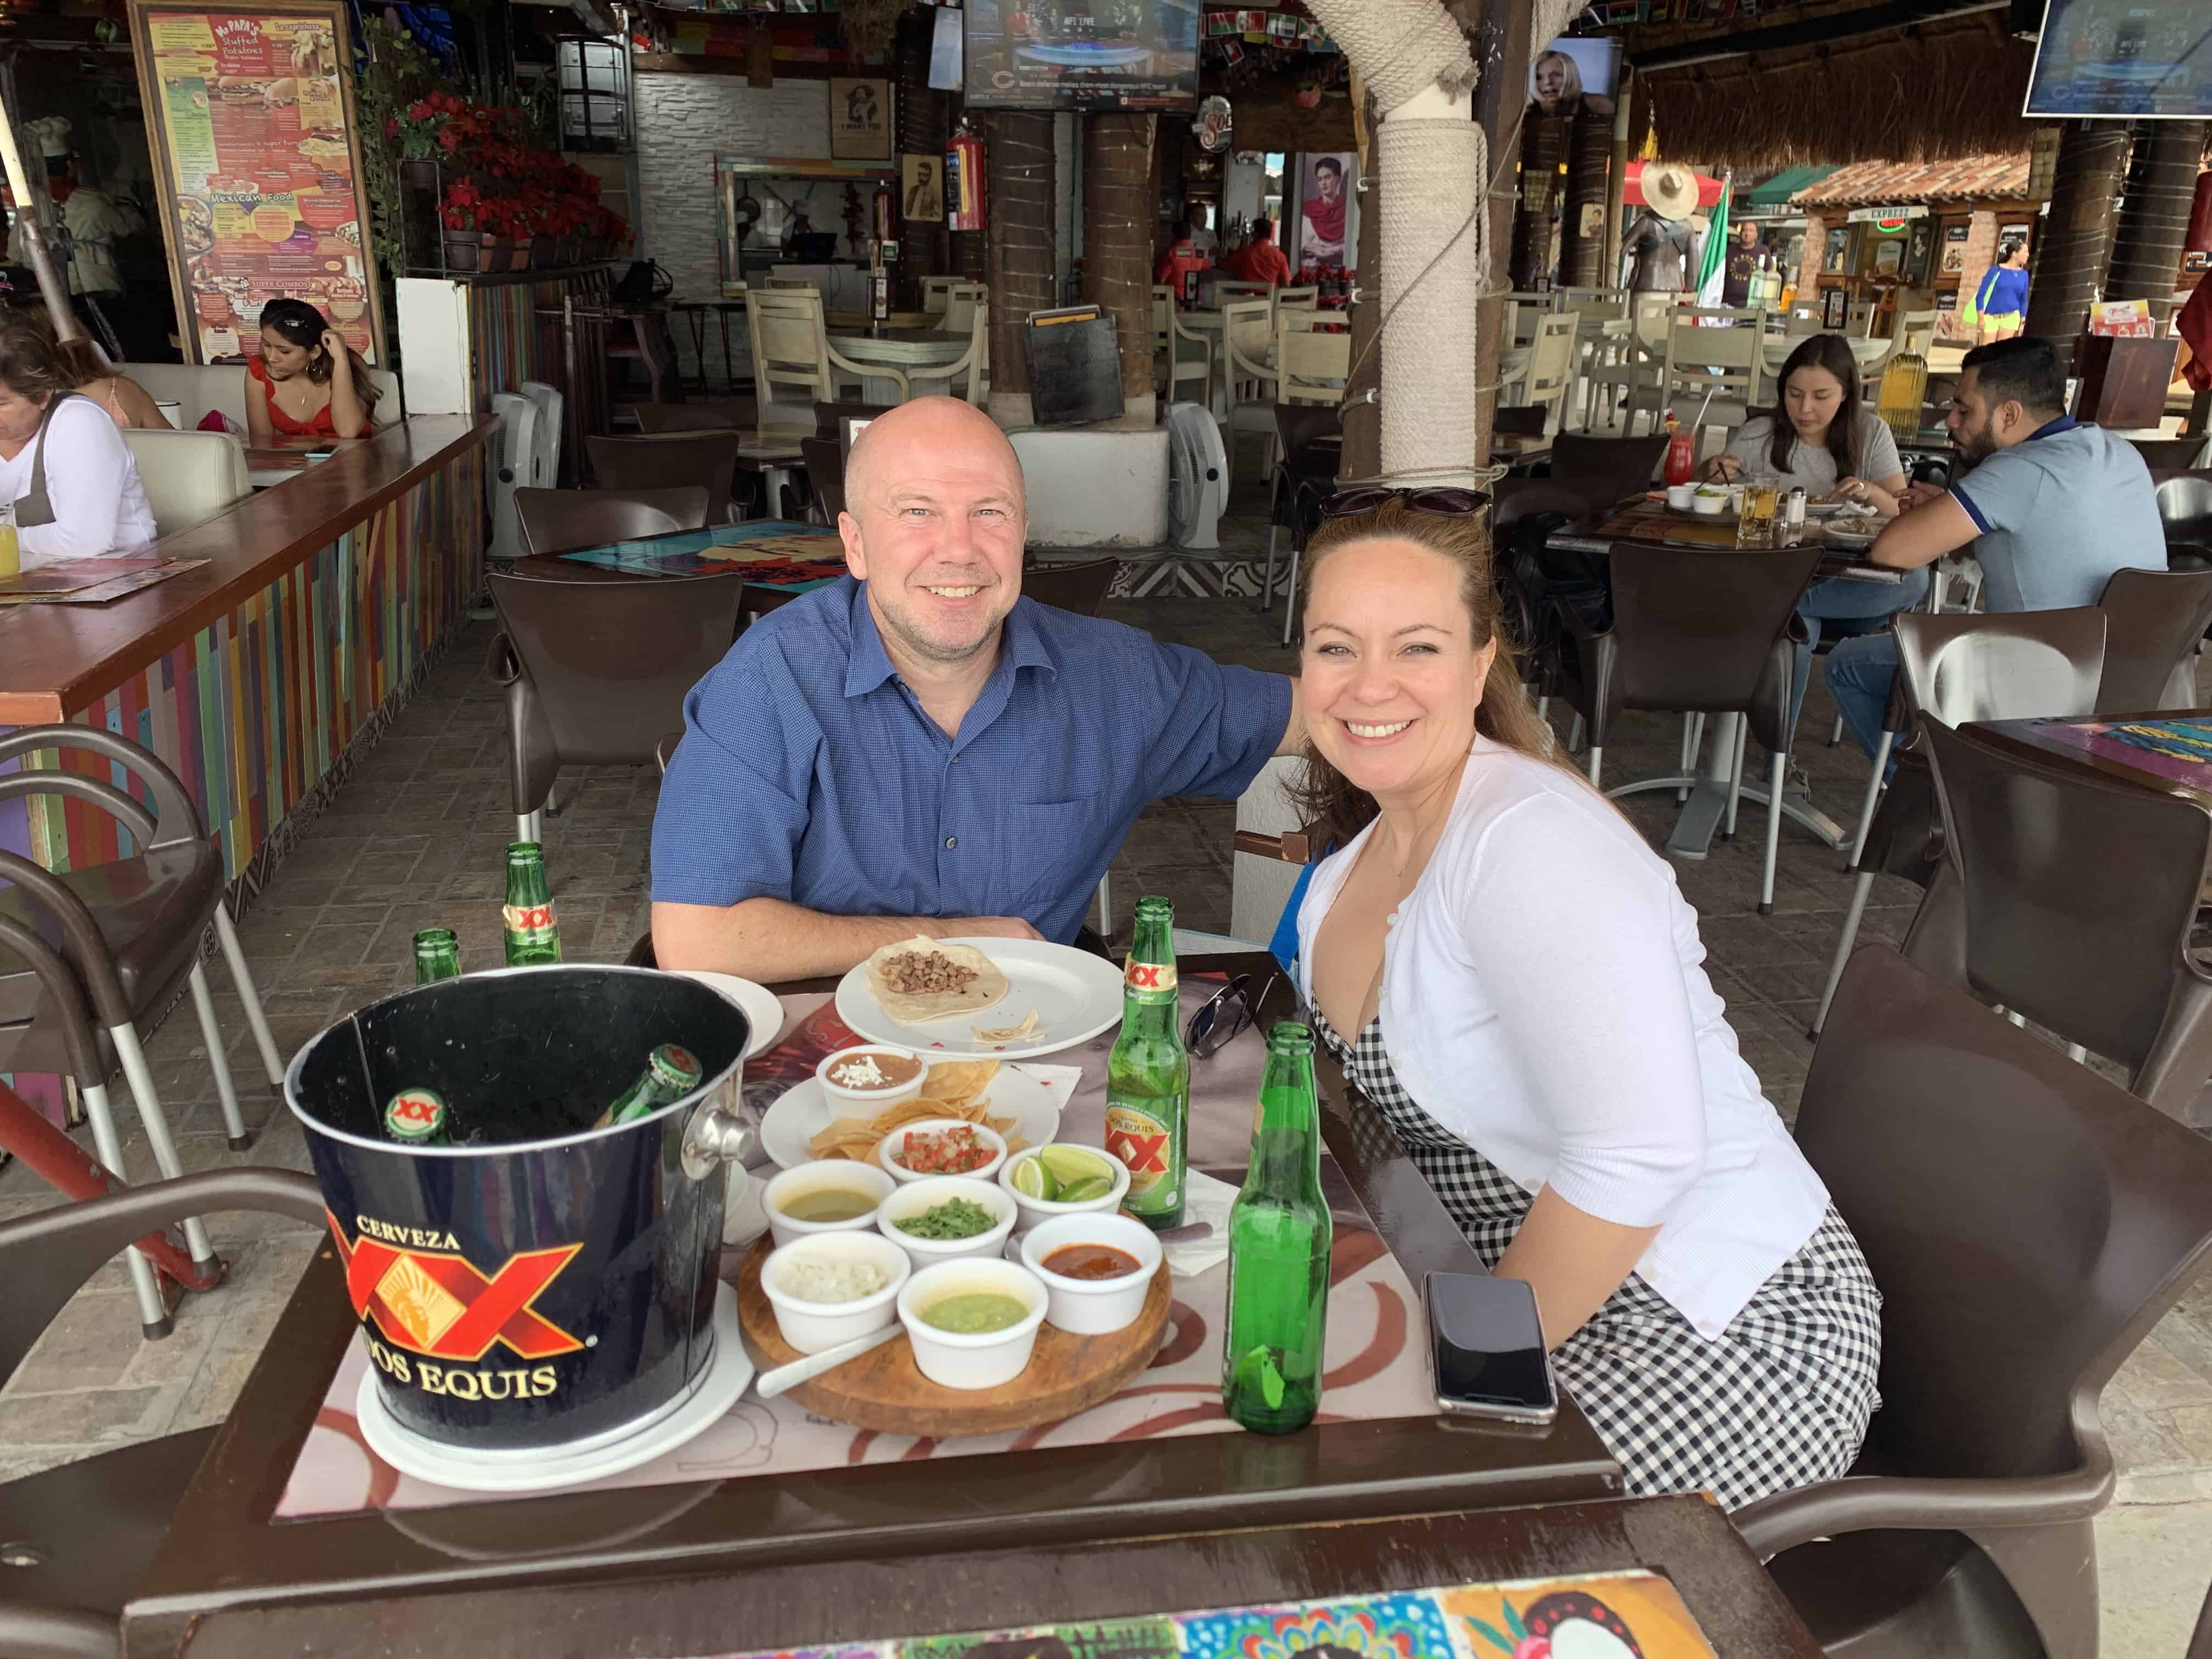 Westin Lagunamar margaritas at Taco y Tequila Lee and Anna with food